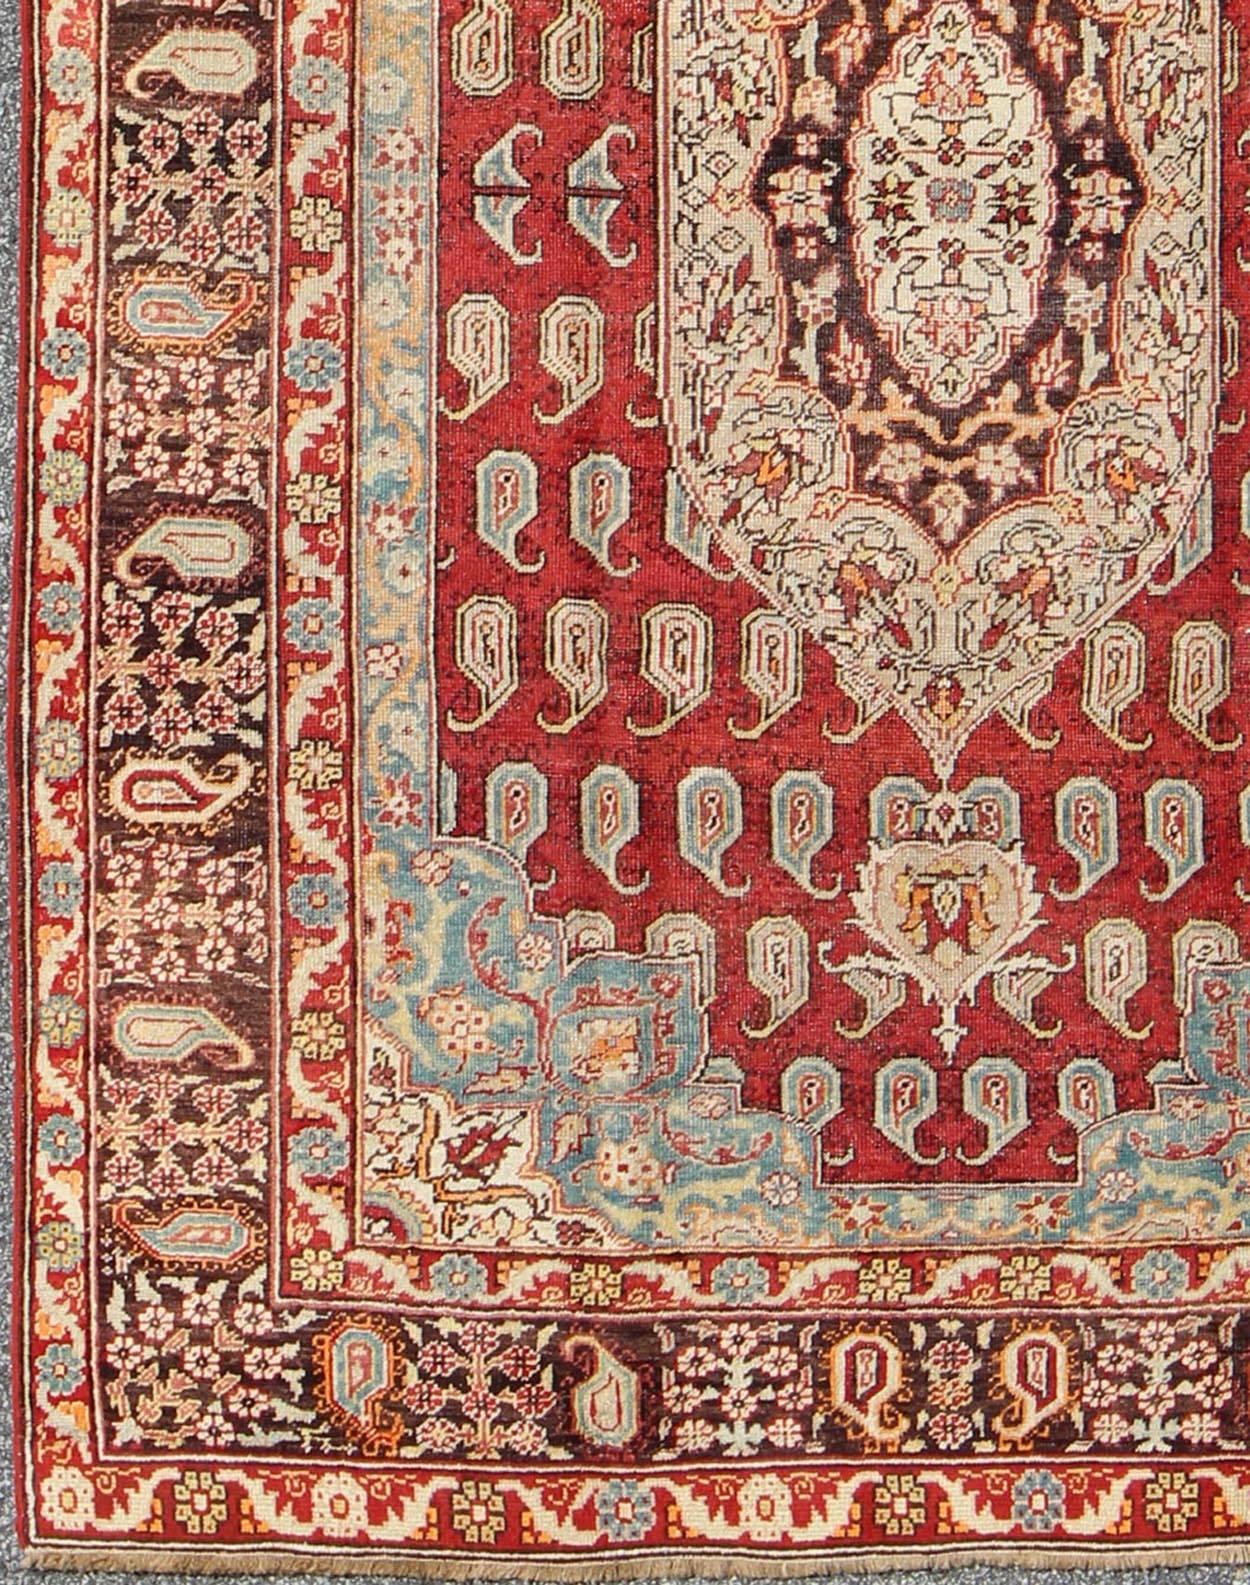 Antique Turkish Oushak Rug with Paisley Design in Red, Brown and Blue.
This antique Turkish Oushak was beautifully handcrafted during the early part of the 20th Century. A regal sub-geometric design and center medallion rests upon a field of red. An